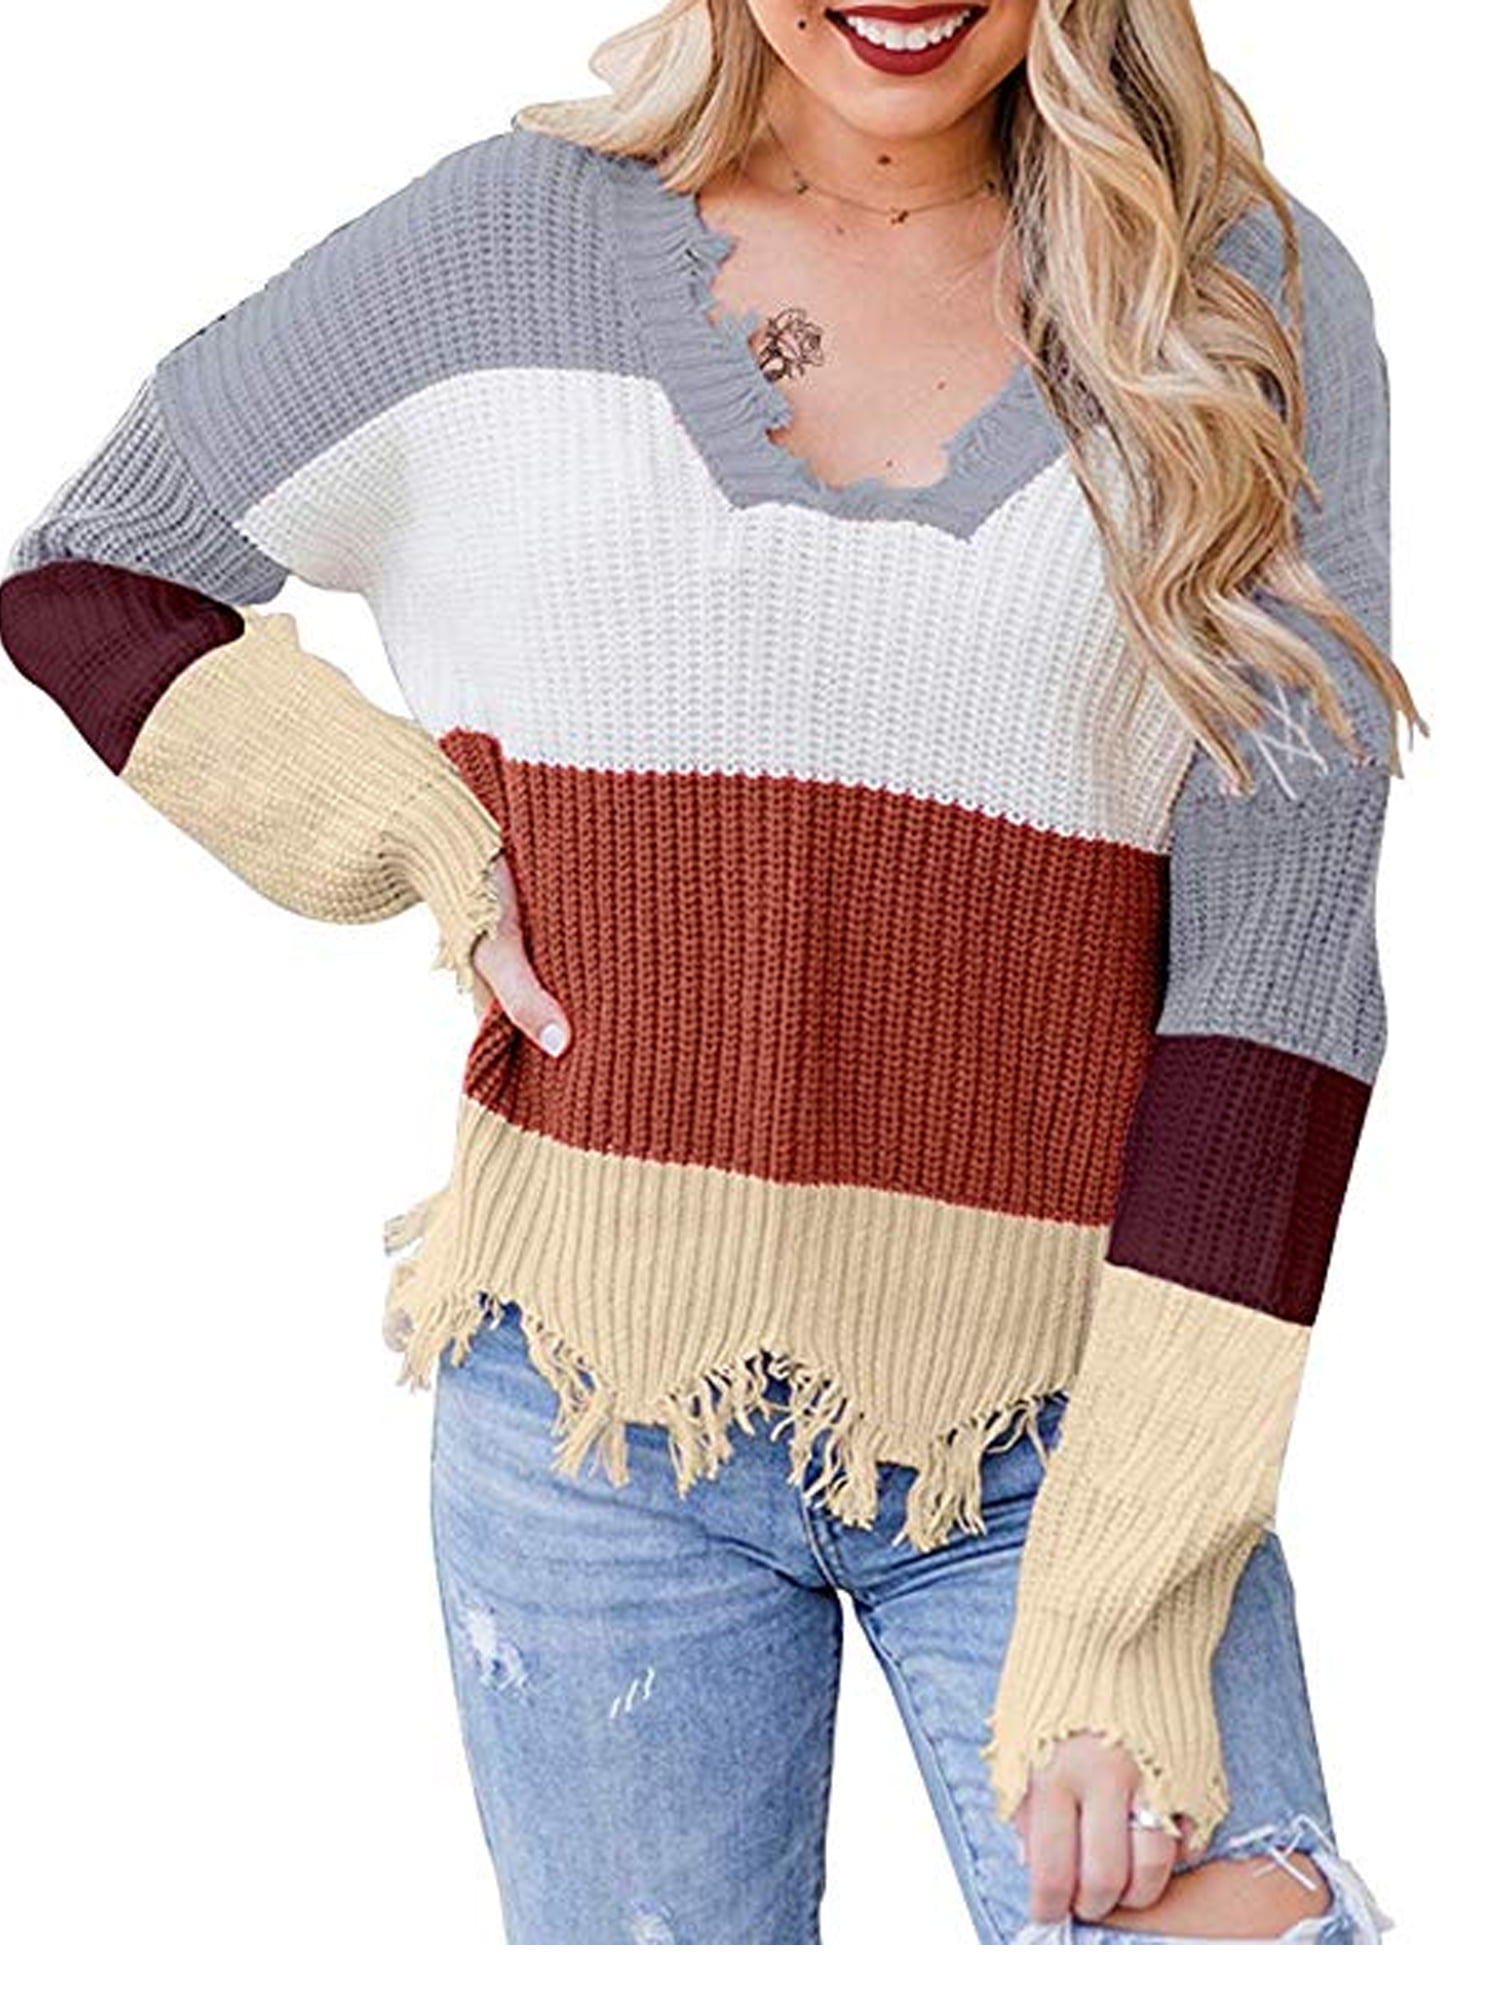 Off The Shoulder Sweater Women Fall Pockets Color Block Knit Pullover Sweaters Tops 